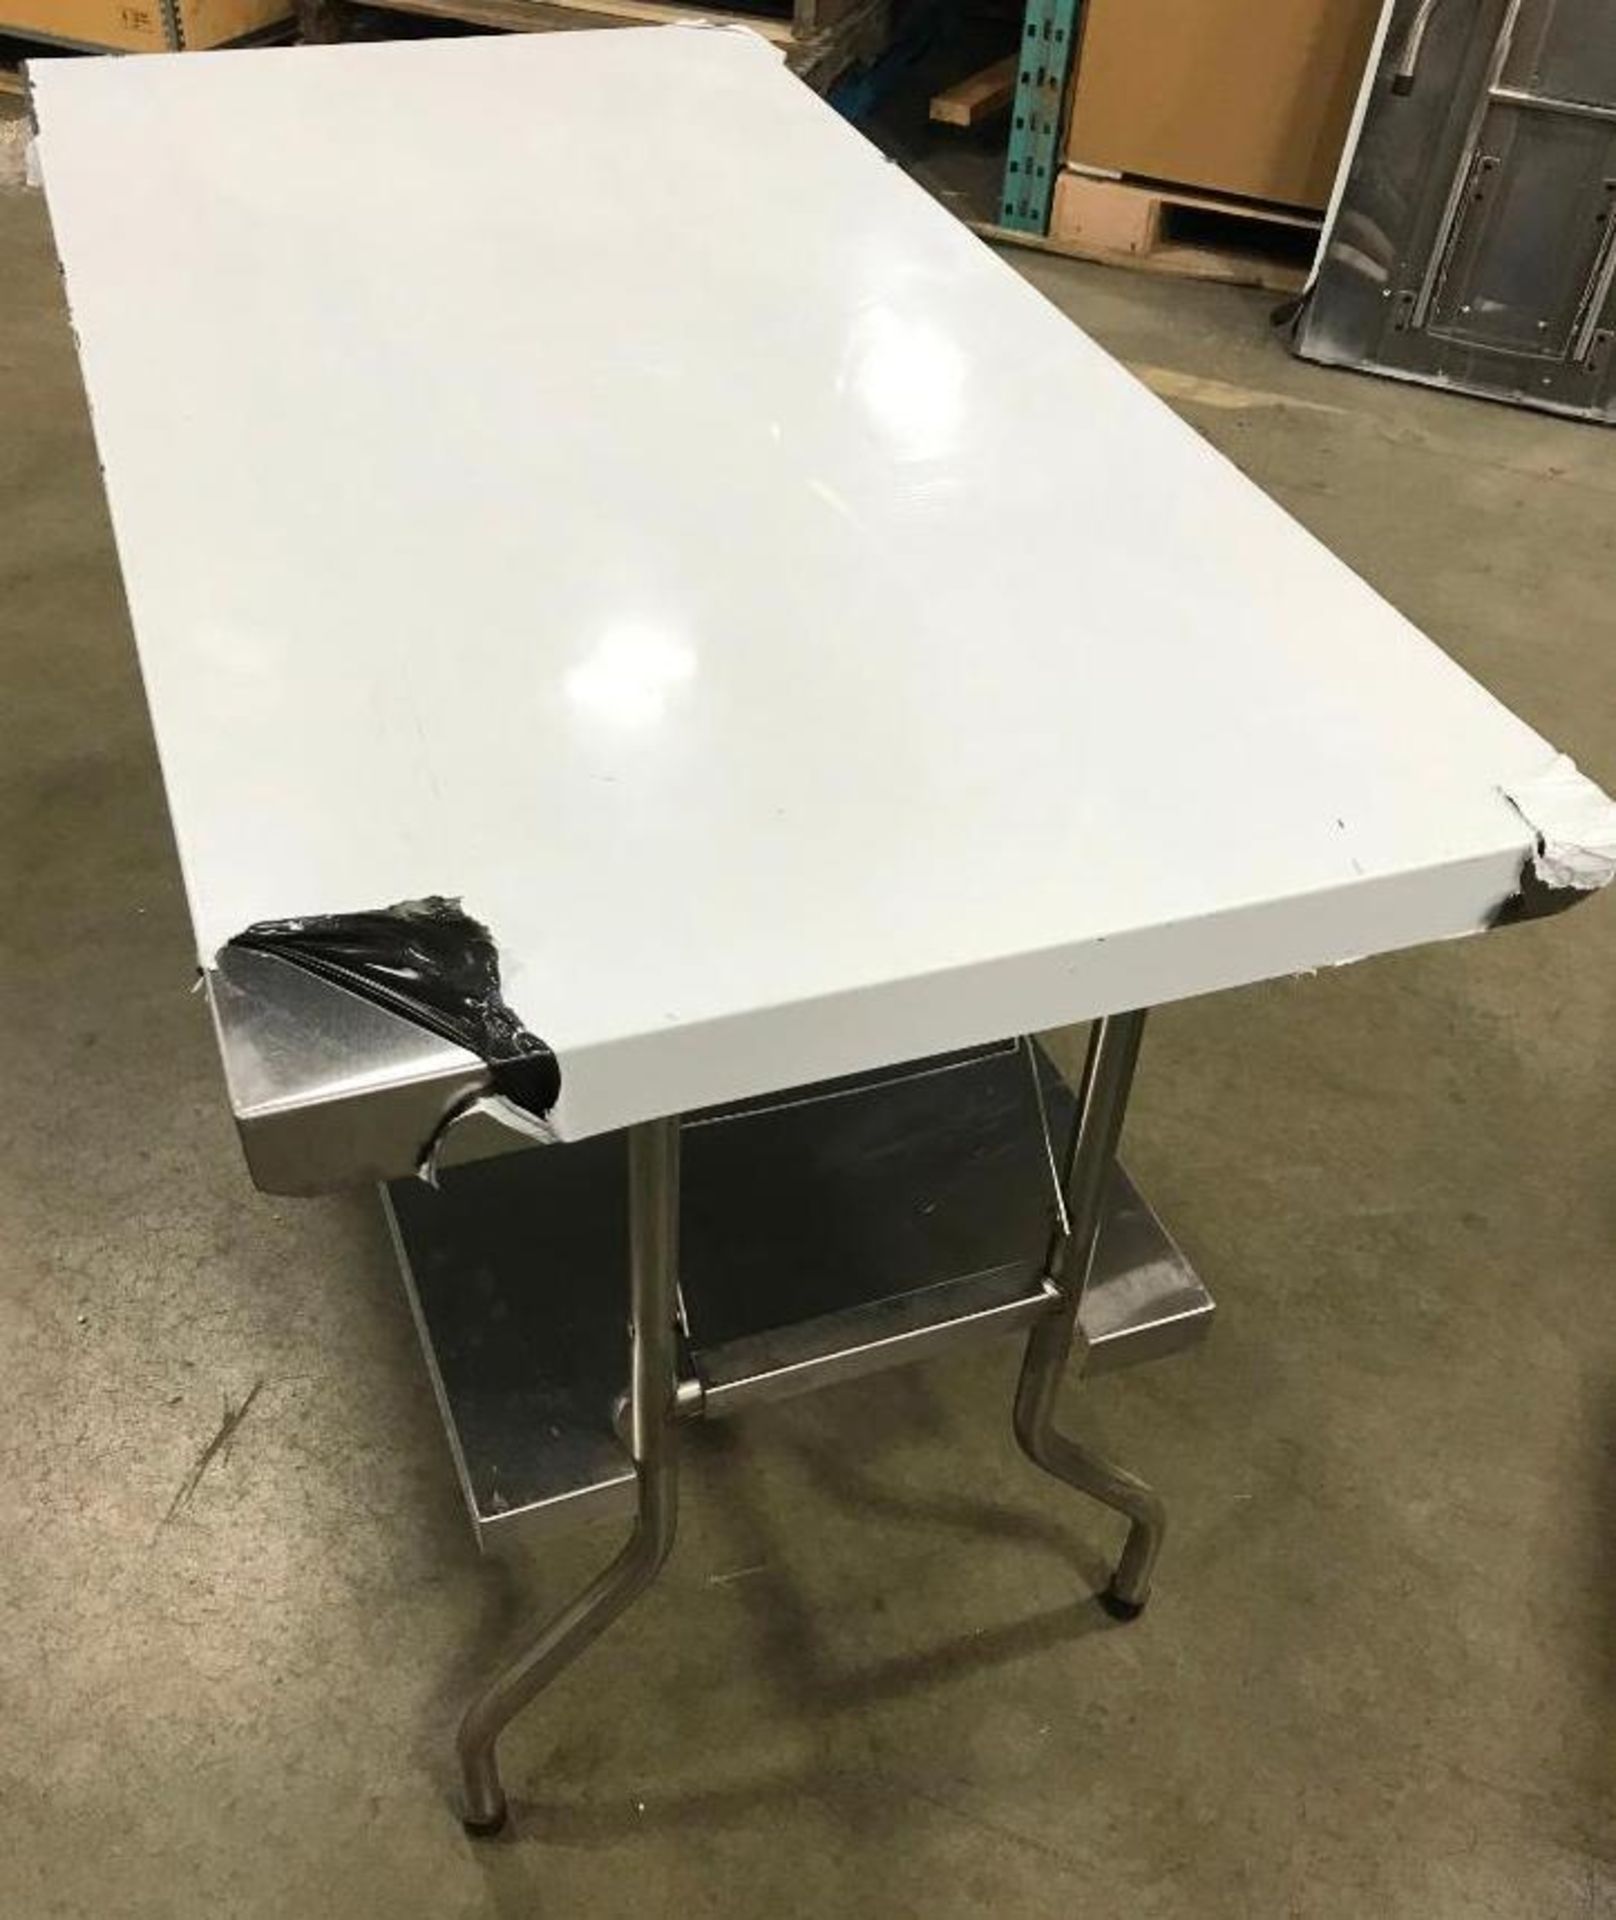 48" X 24" STAINLESS STEEL FOLDING TABLE - Image 5 of 8